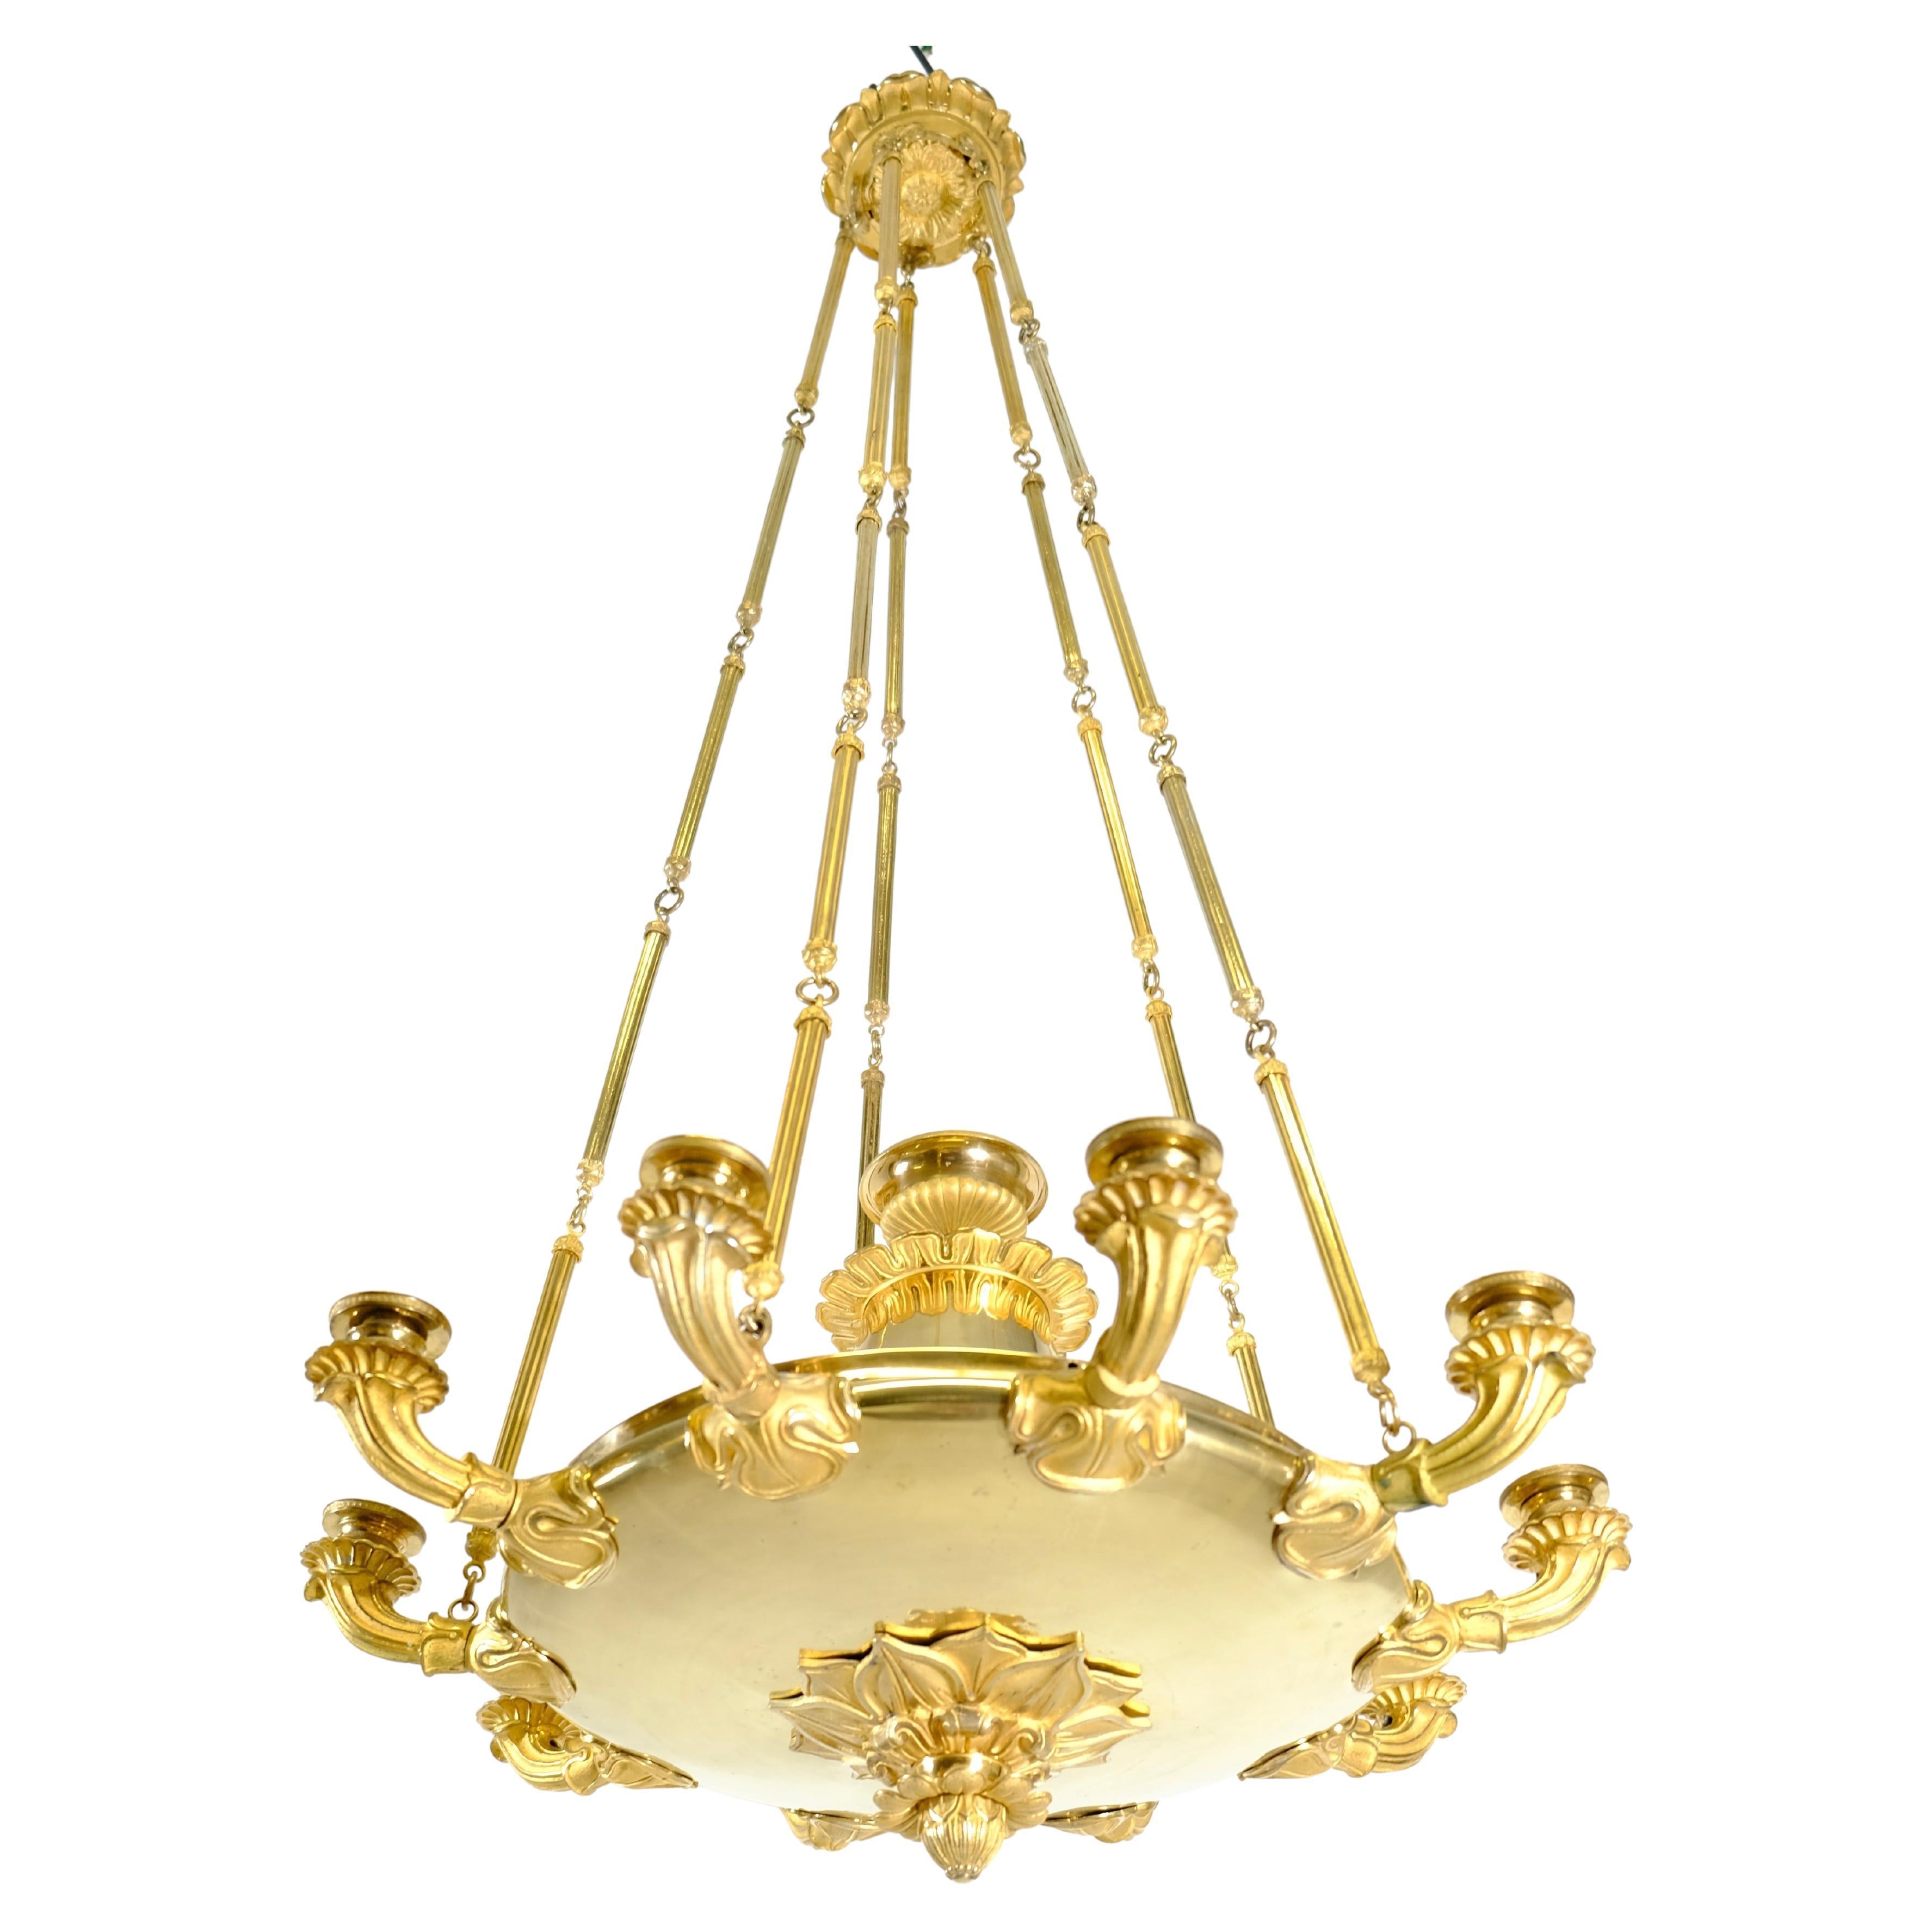 Large Empire Chandelier with Ten Candleholders in great condition. Ca 1820. For Sale